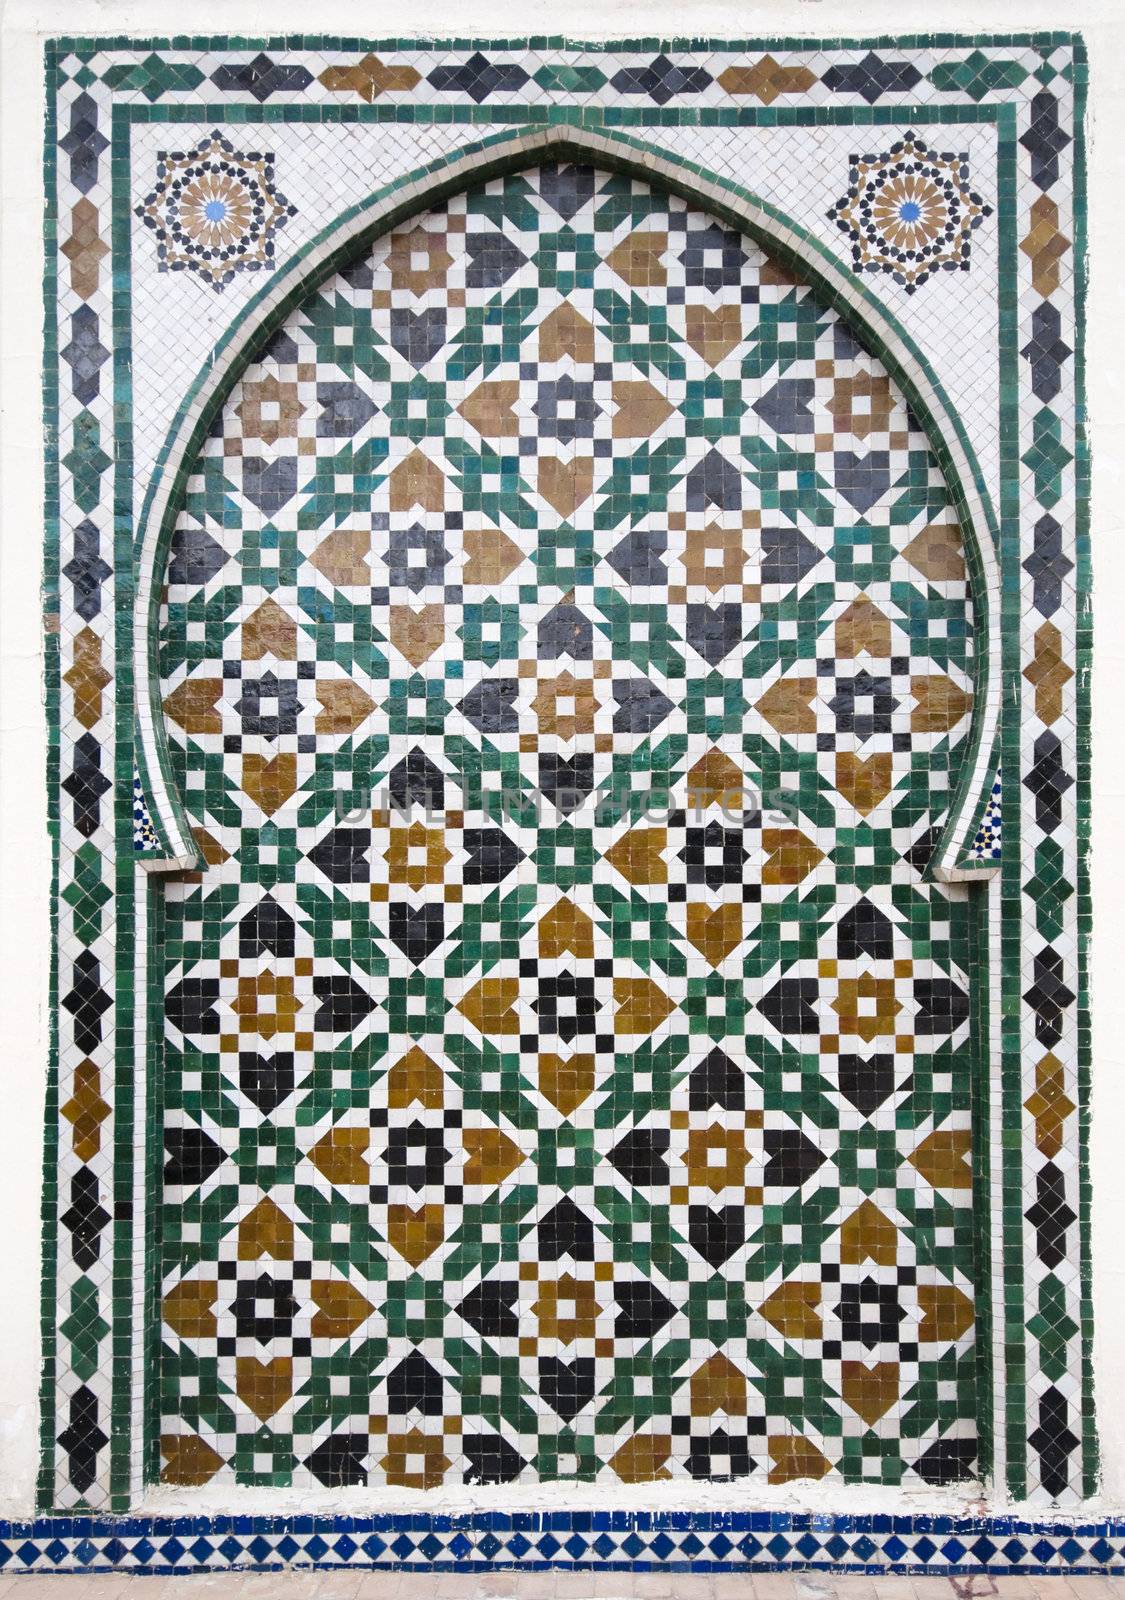 Moroccan style ceramic mosaic - Best of Morocco